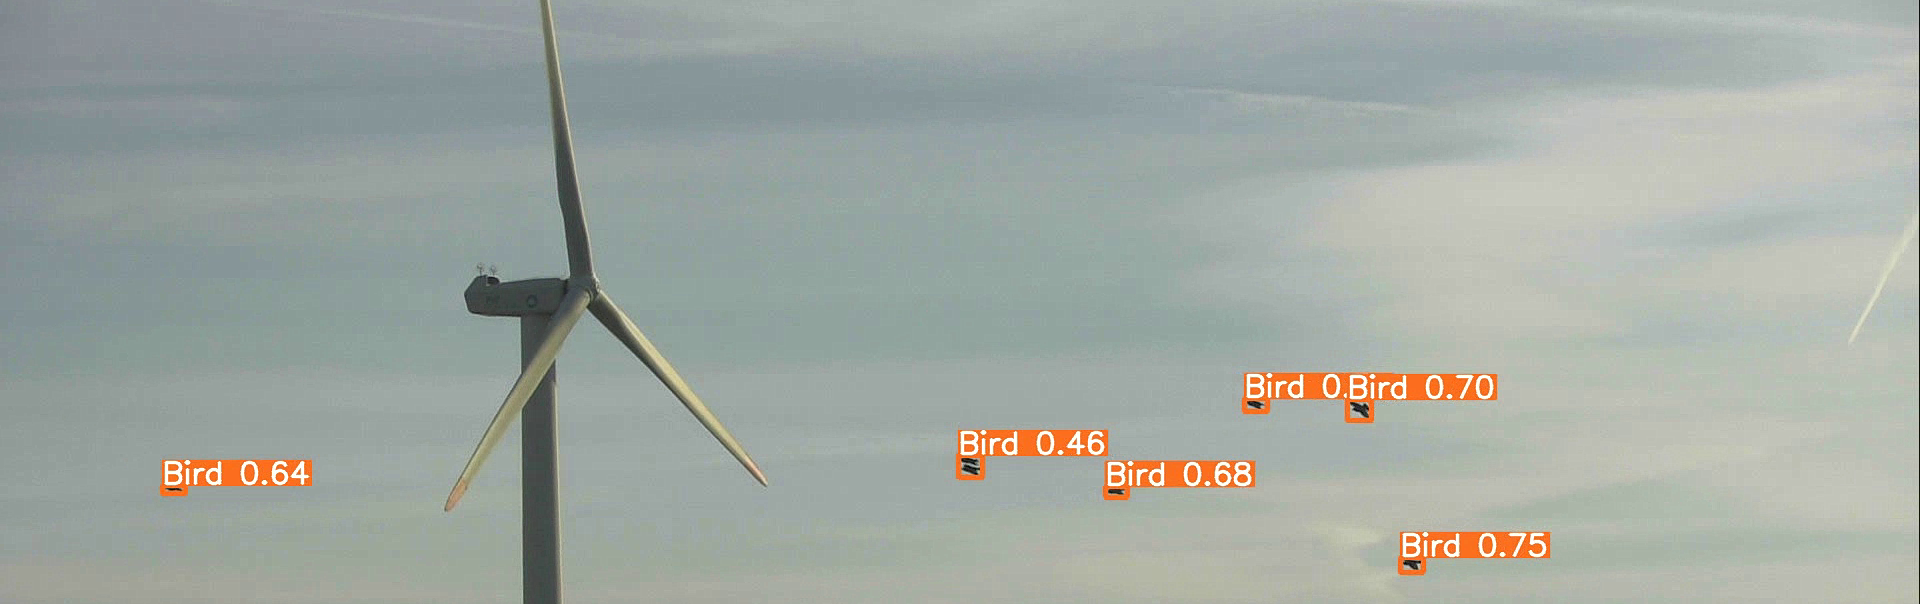 Screenshot from a video recording made by an AVES camera on a wind turbine. The image shows a flock of birds captured by the camera and recognised by the algorithm. 